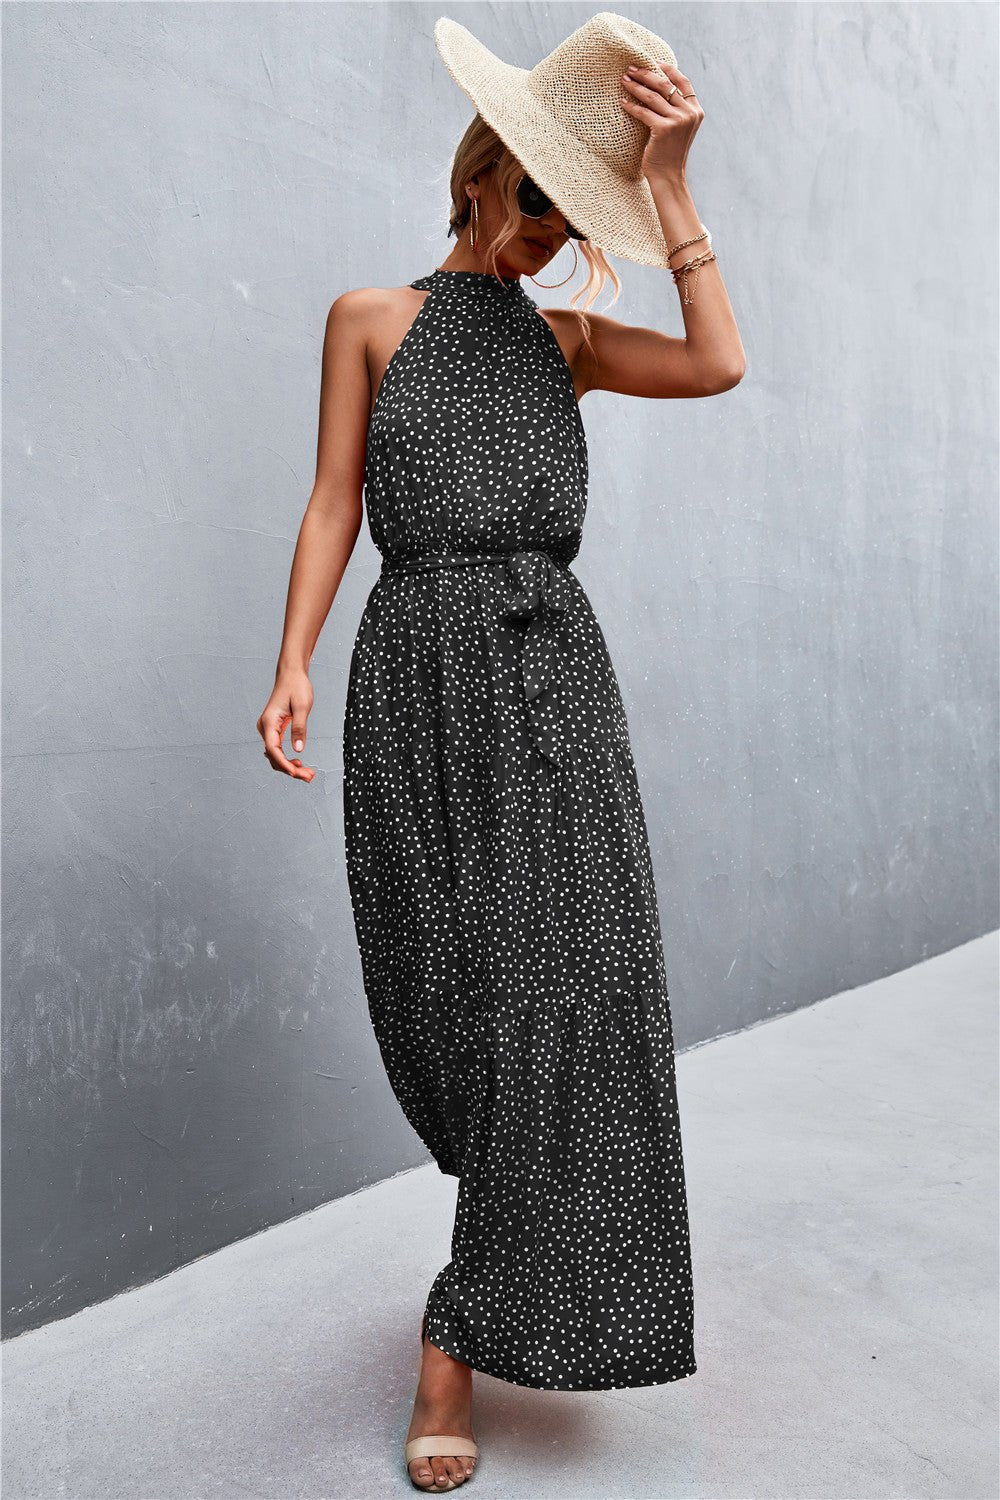 Let Me Remind You Printed Maxi Dress - black polka dot maxi dress with halter neck and tie waist. #Firefly Lane Boutique1